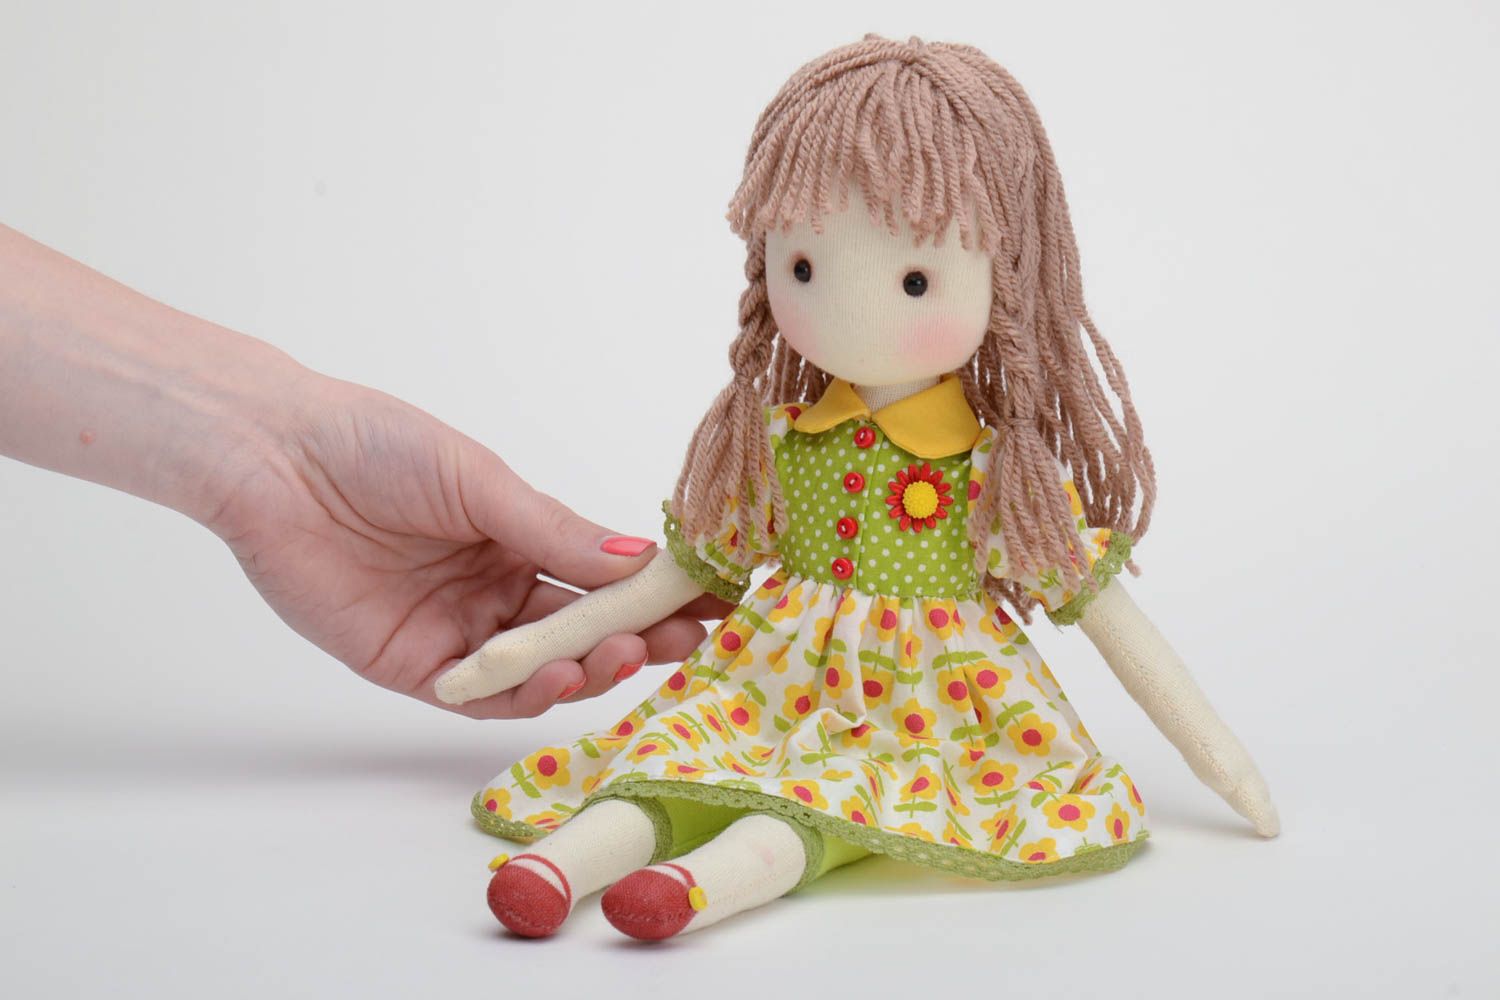 Handmade designer soft doll sewn of cotton fabric girl in floral dress photo 5